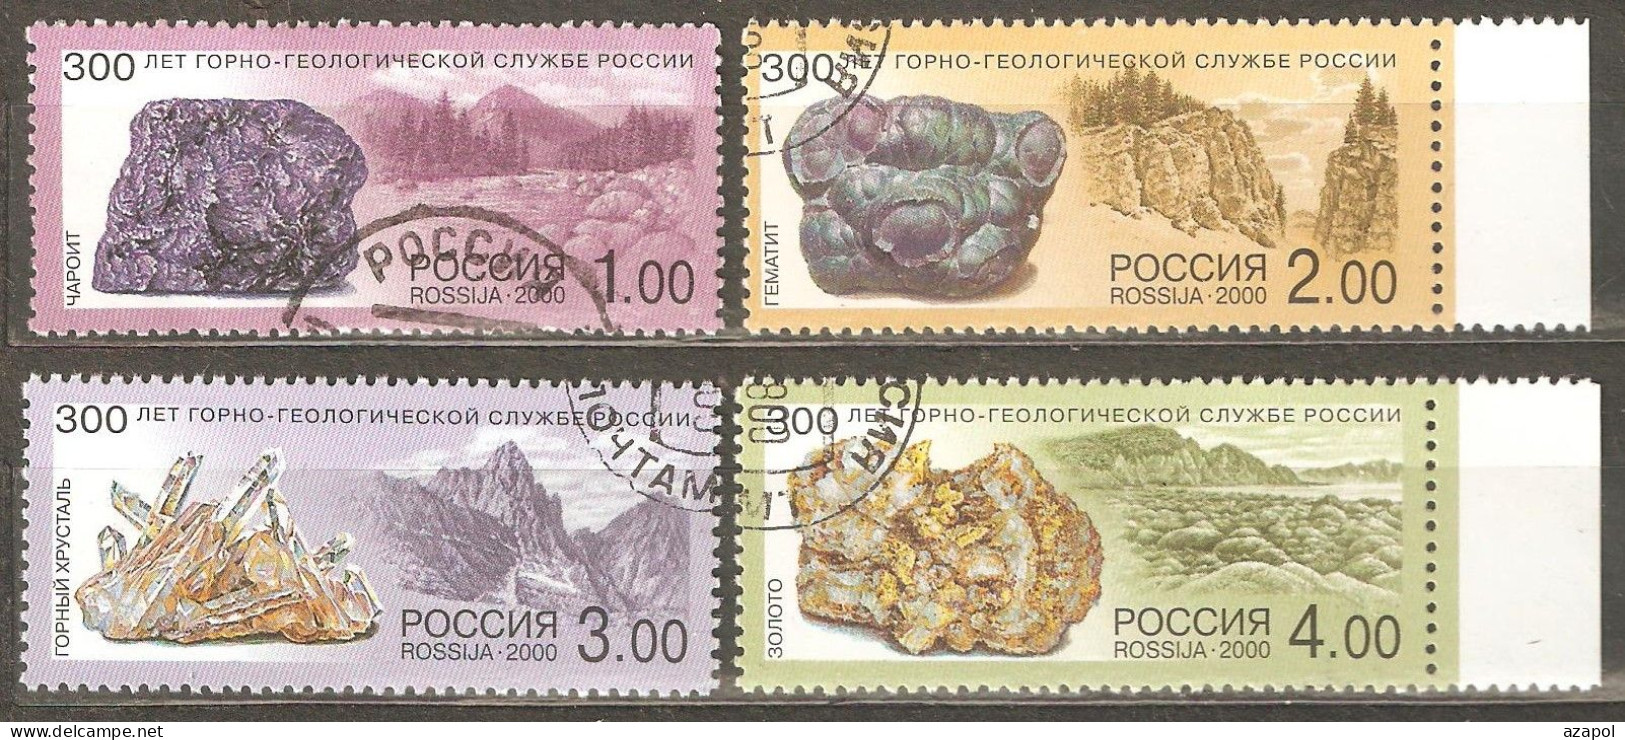 Russia: Full Set Of 4 Used Stamps, 300 Years Of Rock-Geological Service, 2000, Mi#845-8 - Gebraucht